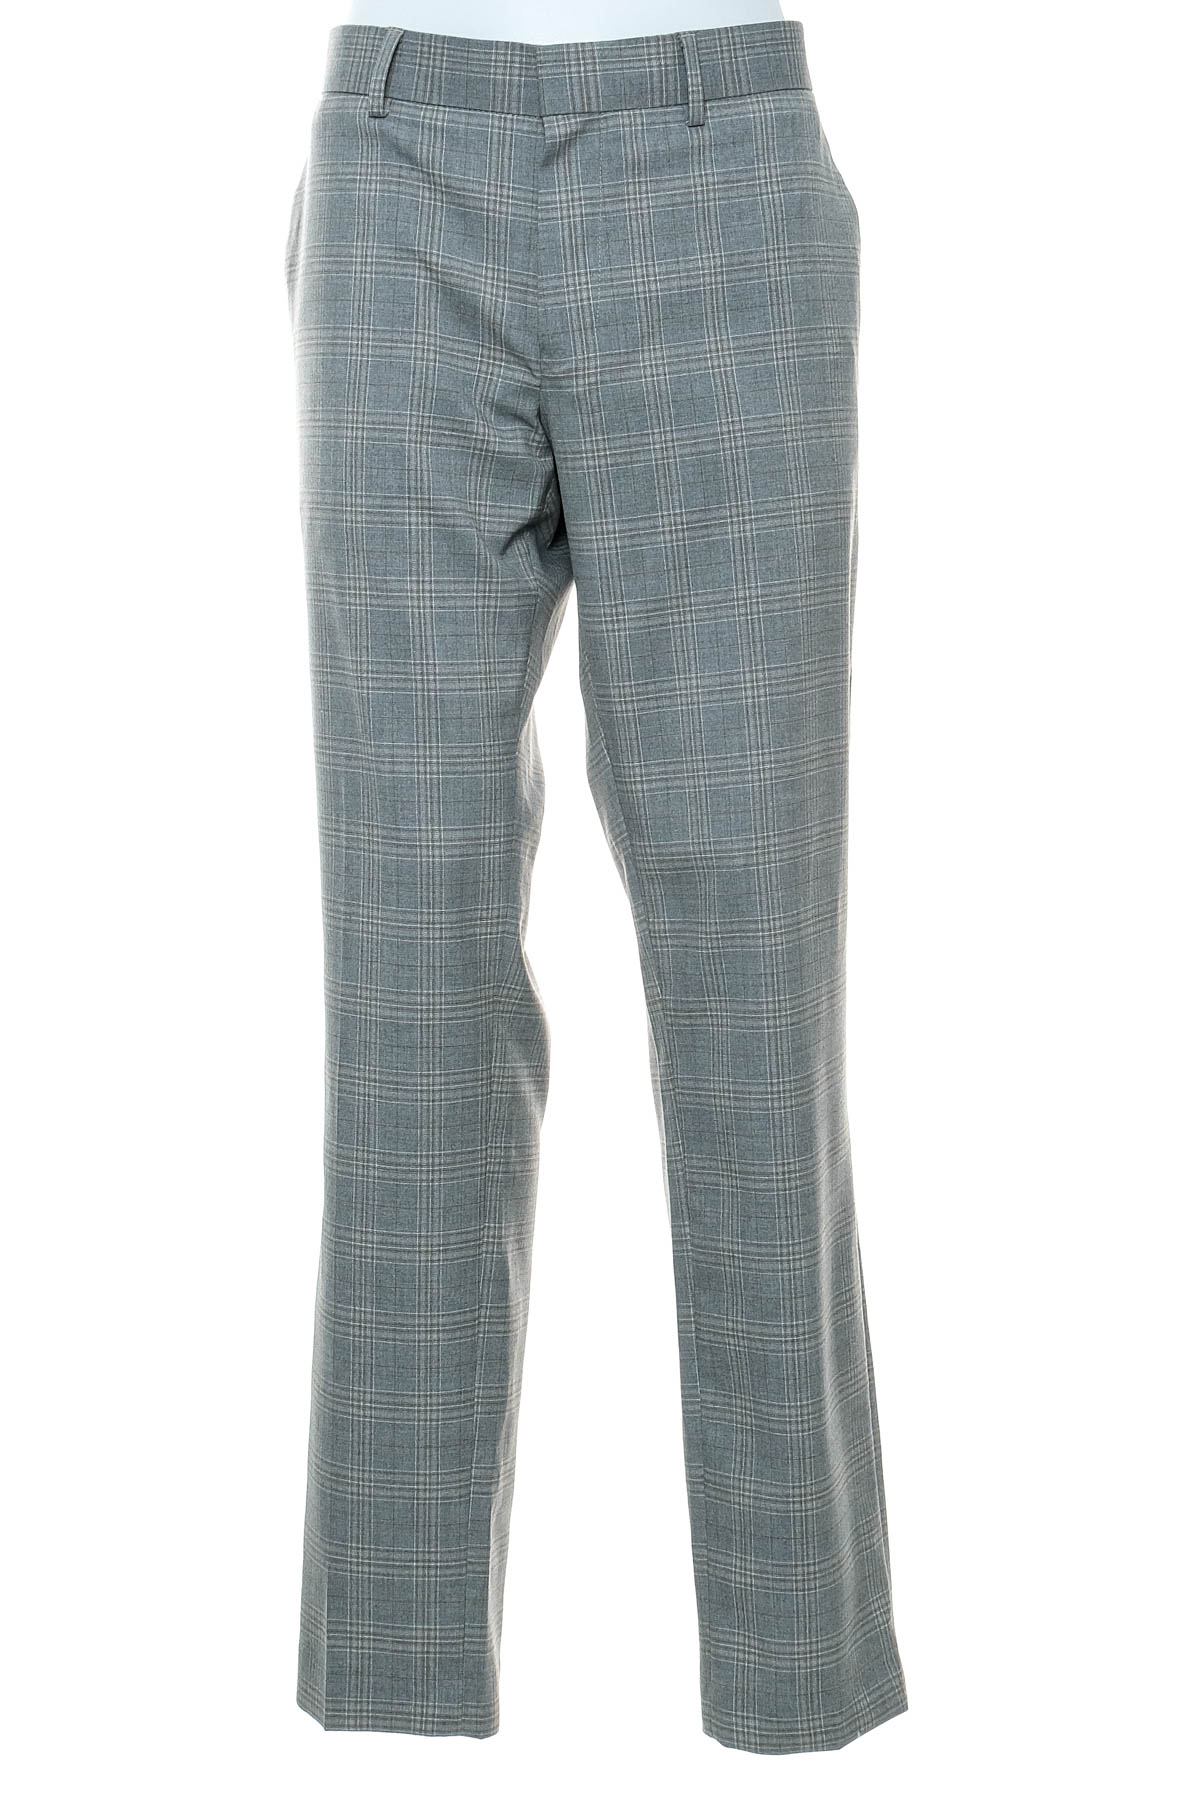 Men's trousers - ISAAC DEWHIRST - 0